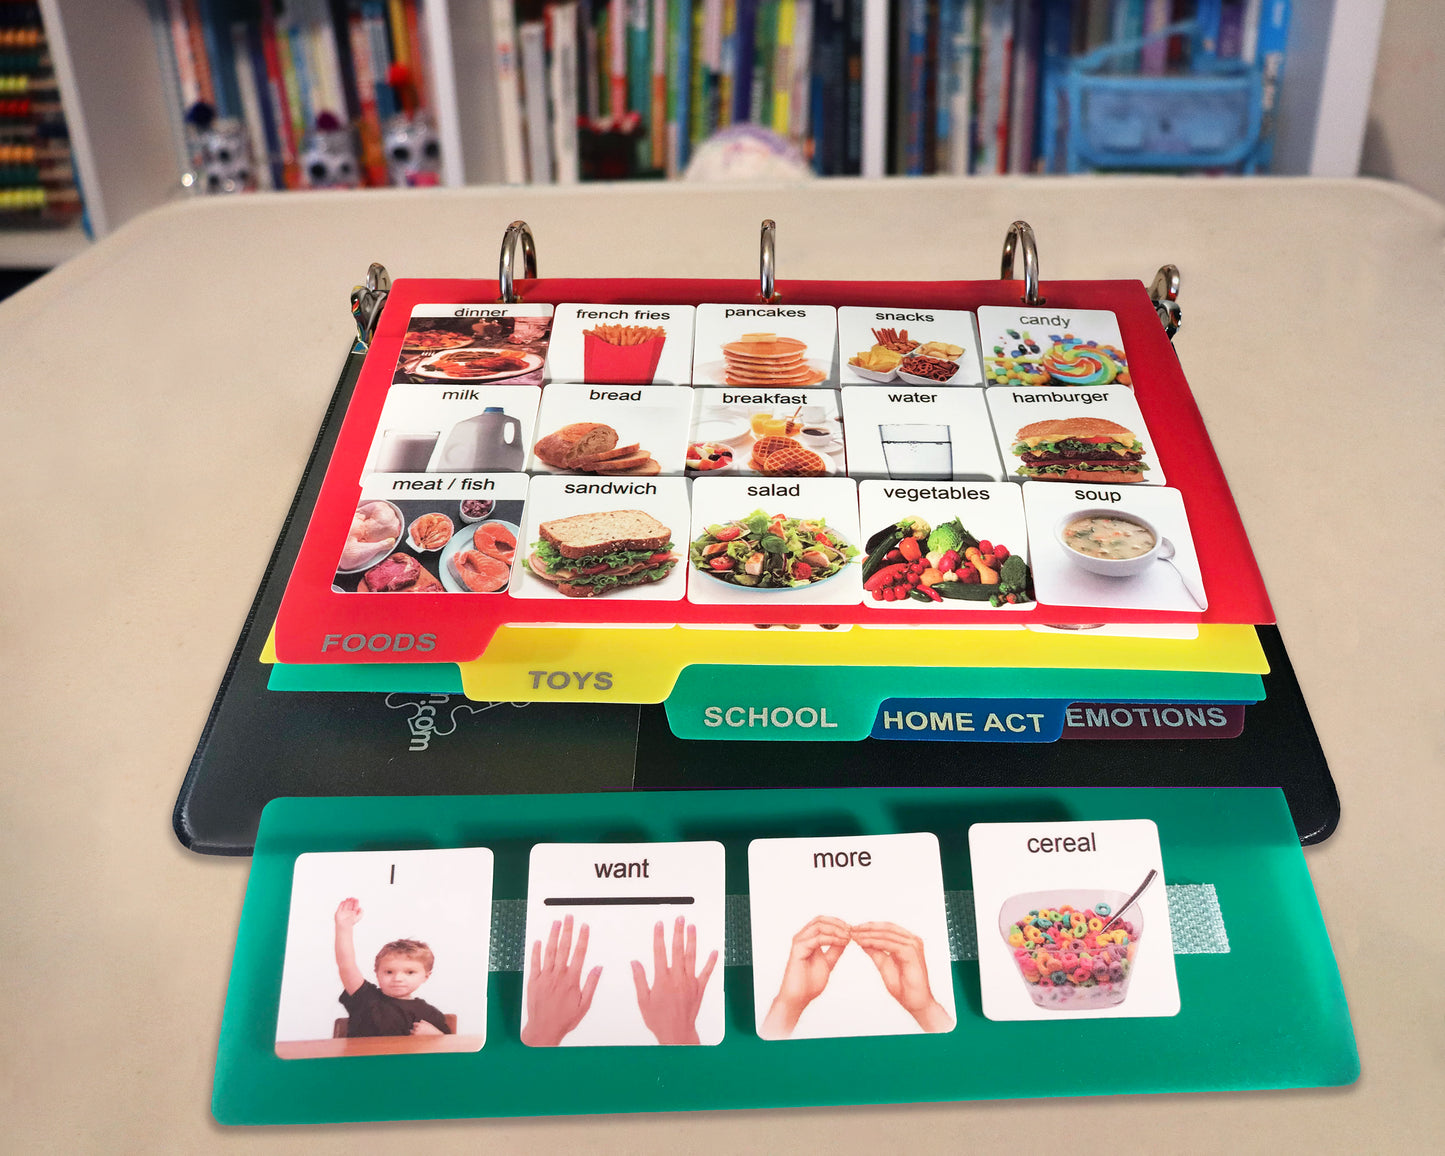 Smile4autism Visual Communication Book,162 Asd Laminate Photo Cards: Autism Language Vocabulary, Speech Articulation Therapy, Adhd & Aprexia Learning